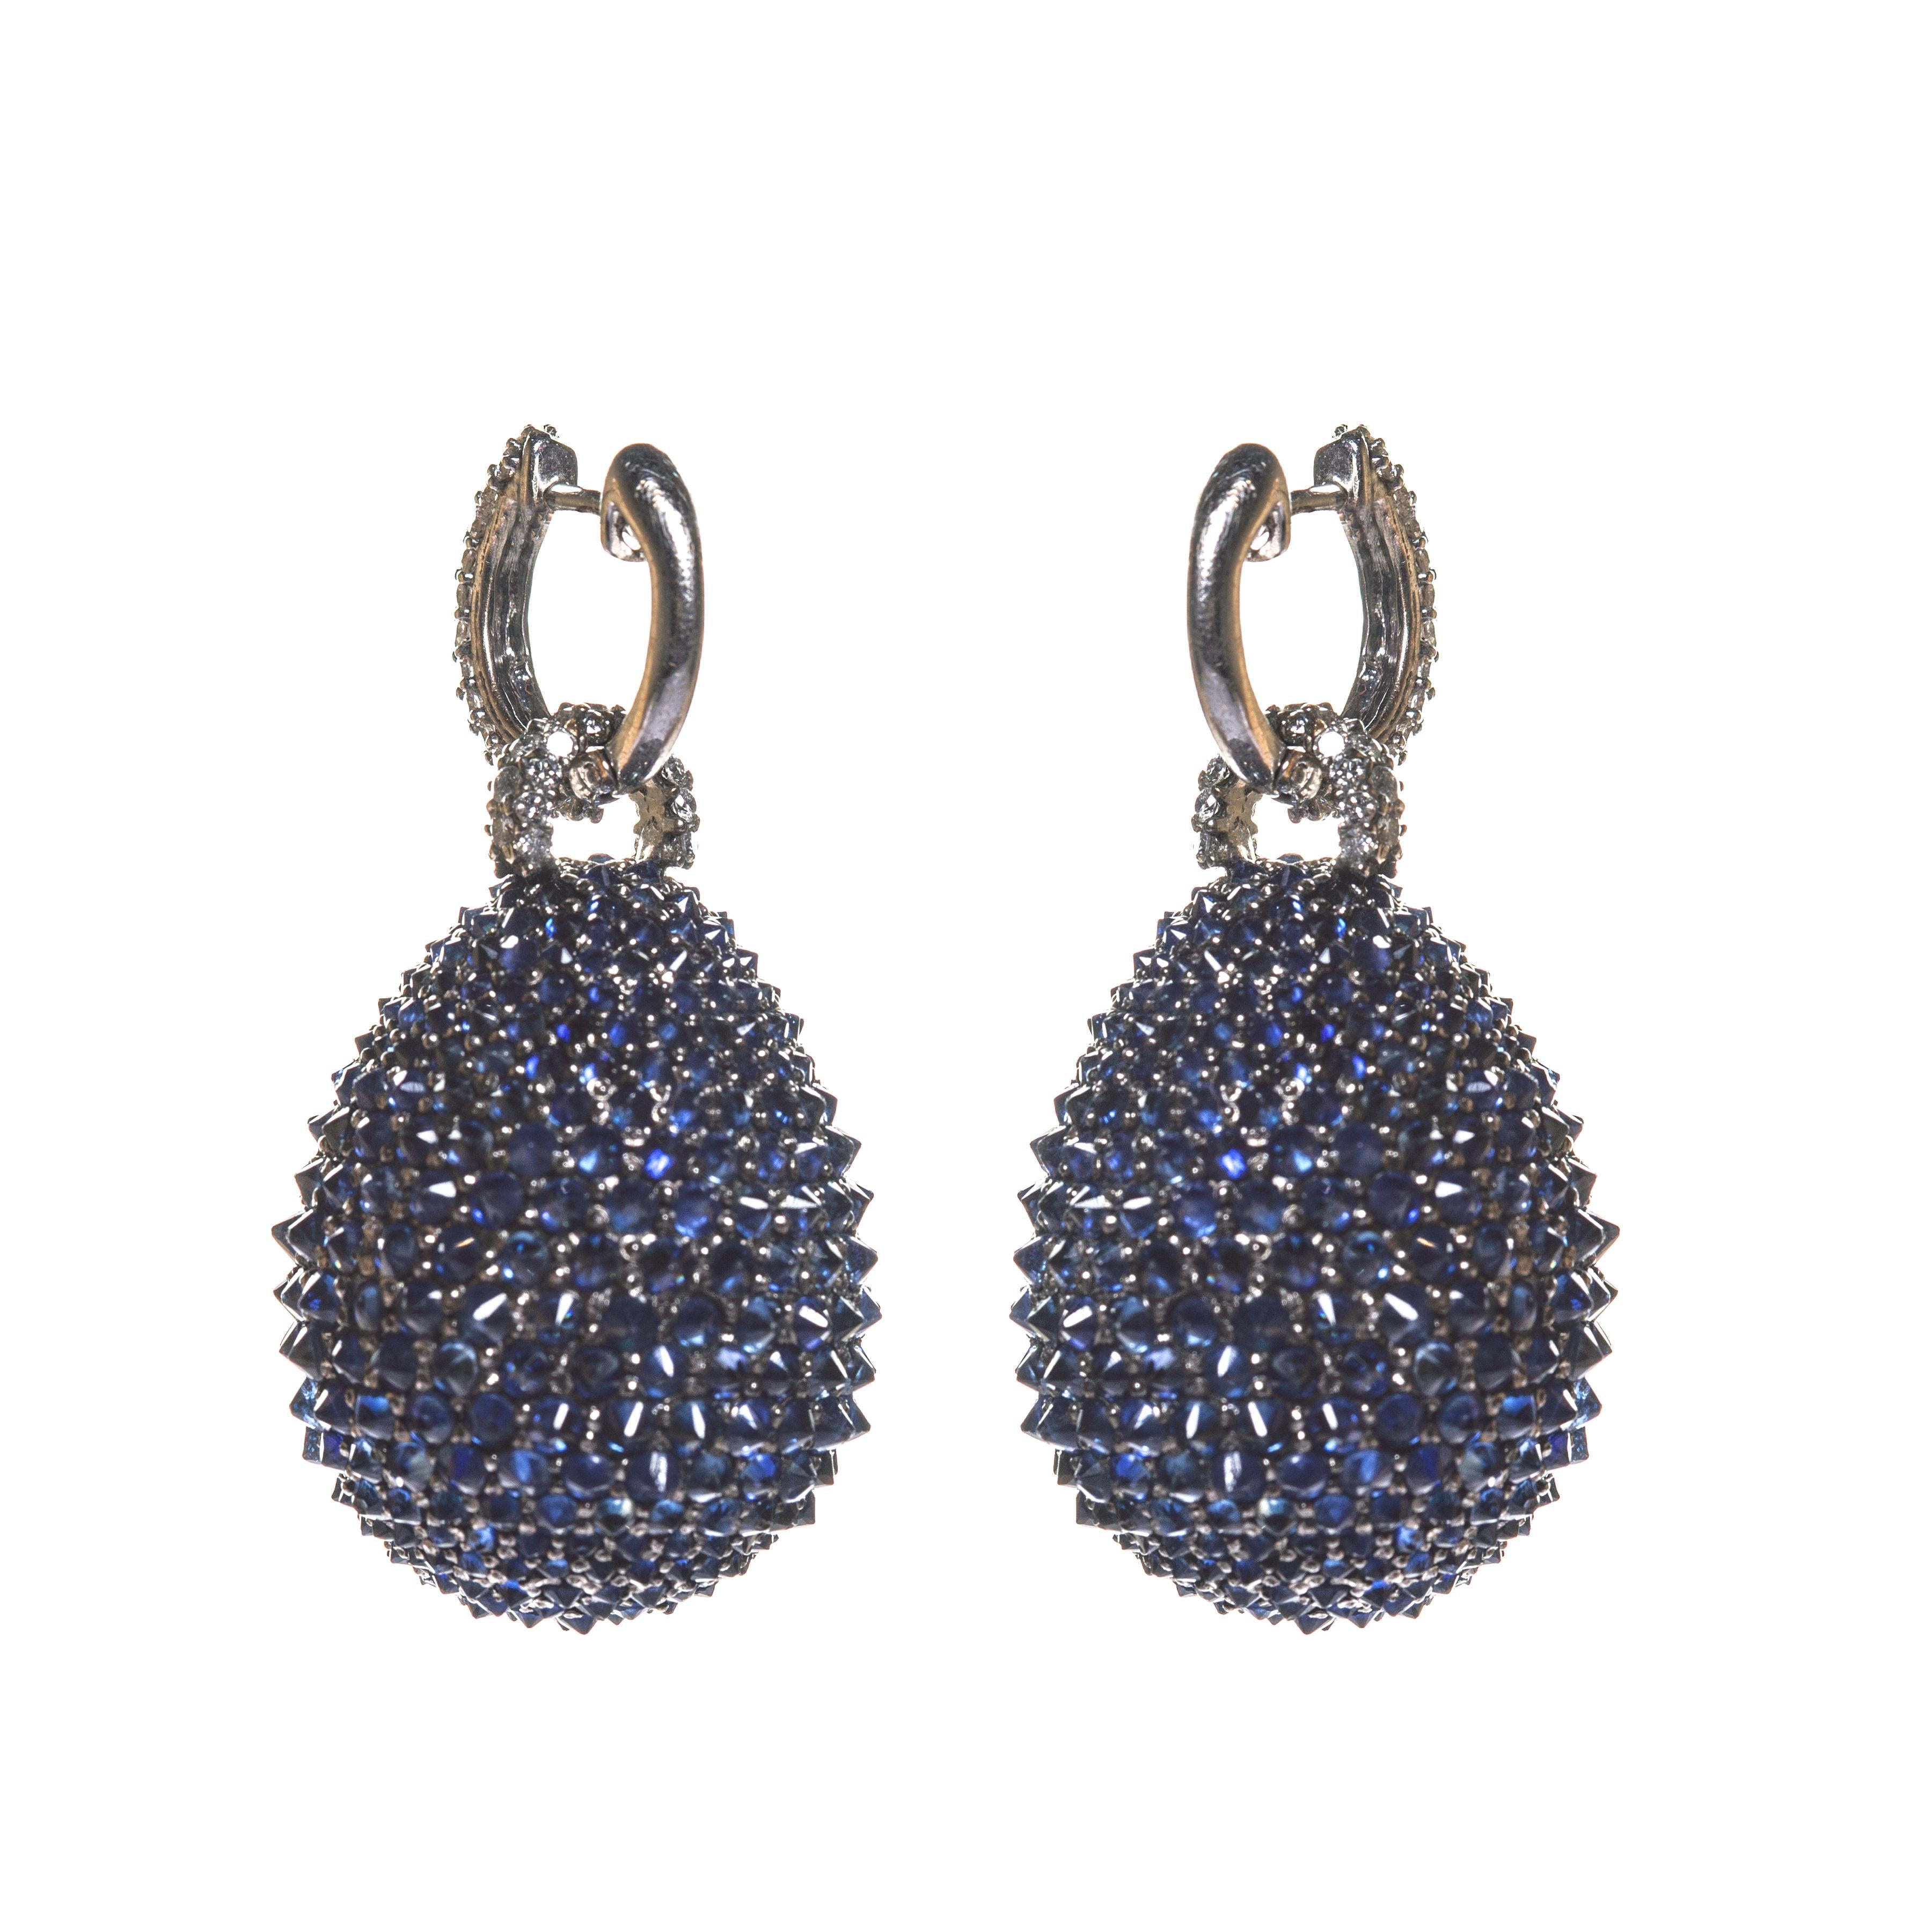 Brilliant Cut Dome Earrings in Silver and 18 Karat Gold Set with Diamonds and Blue Sapphires For Sale